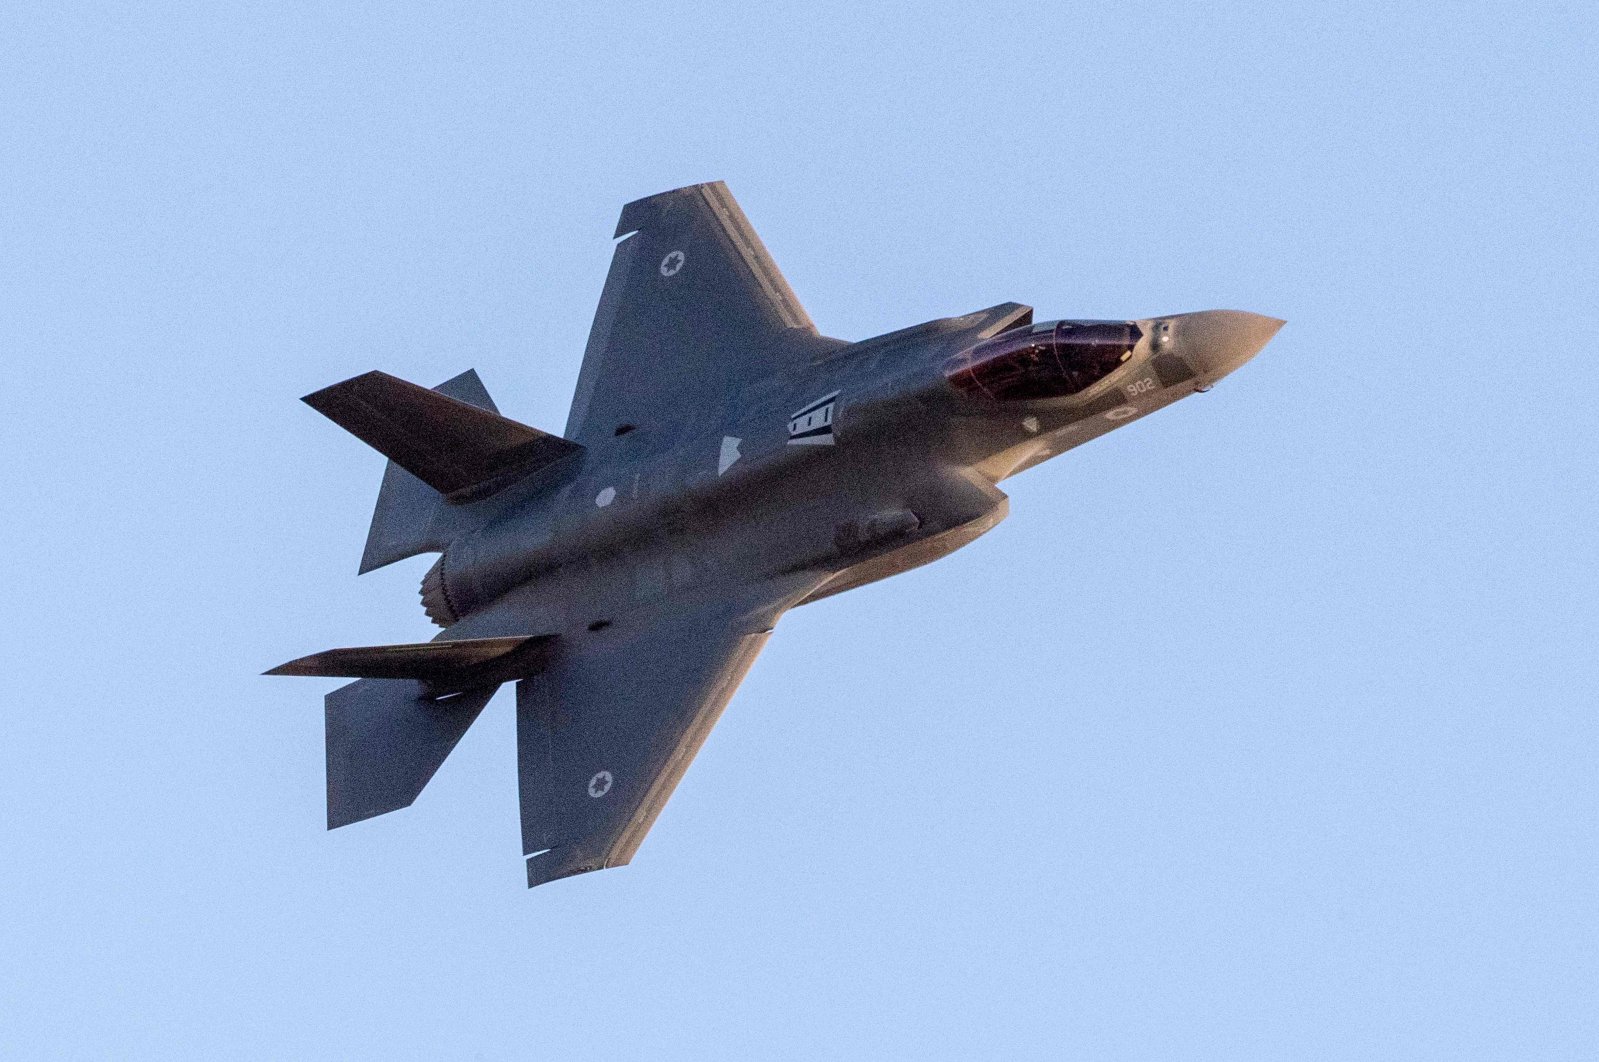 An Israeli Air Force F-35 Lightning II fighter plane performs at an air show during the graduation of new cadet pilots at Hatzerim base in the Negev desert, near the southern Israeli city of Beer Sheva, June 29, 2017. (AFP Photo)